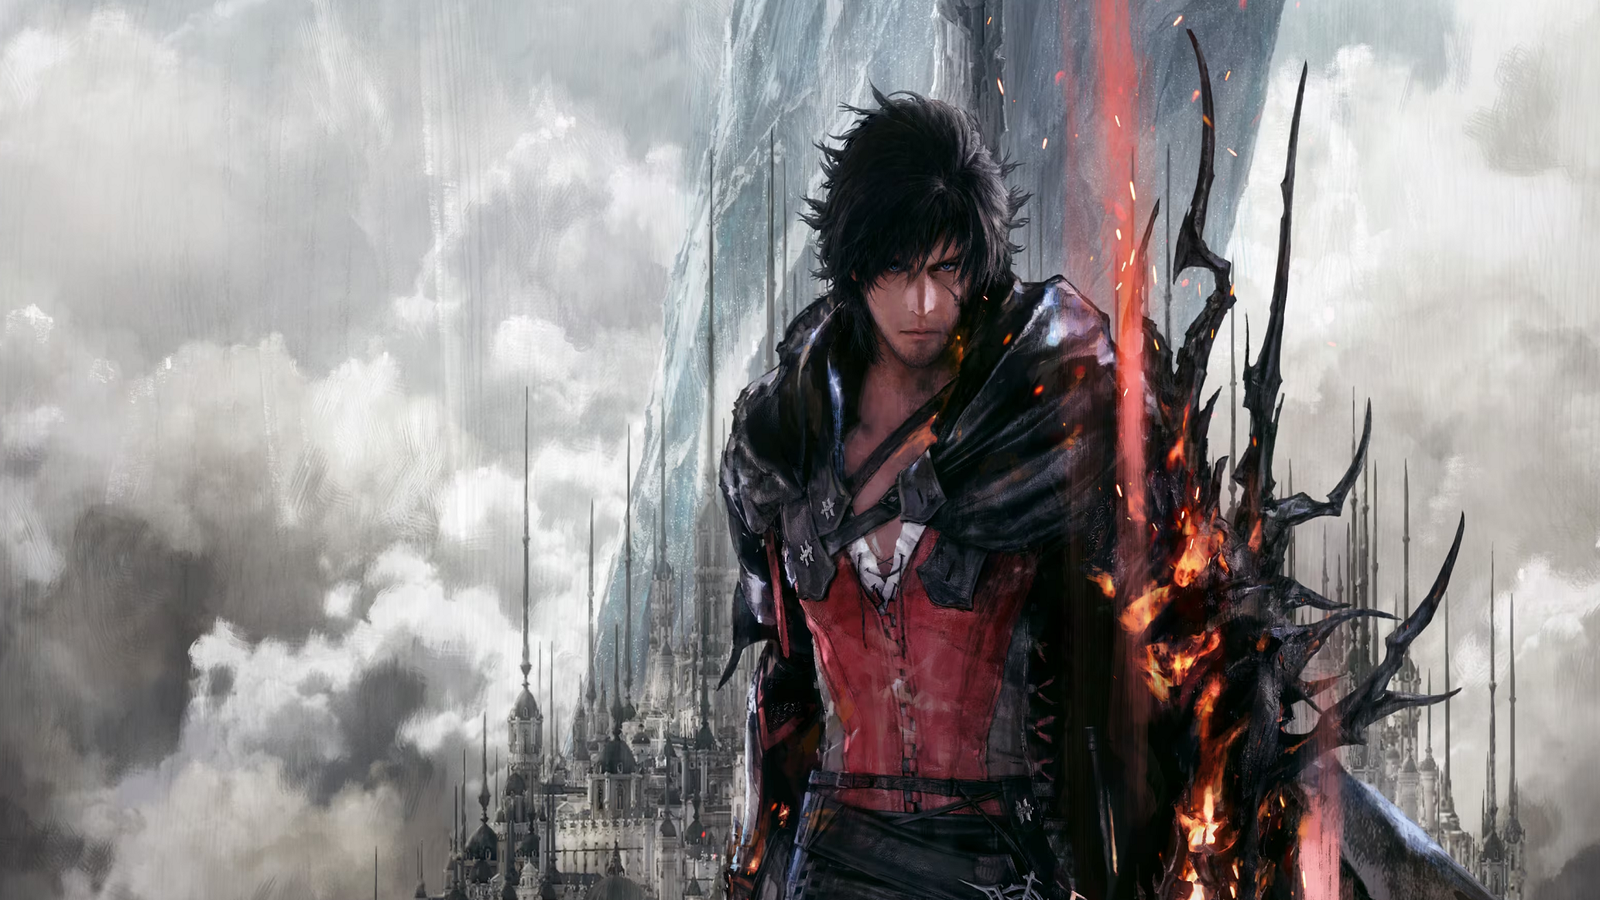 Every Square Enix Game Coming Out In 2021, square enix games 